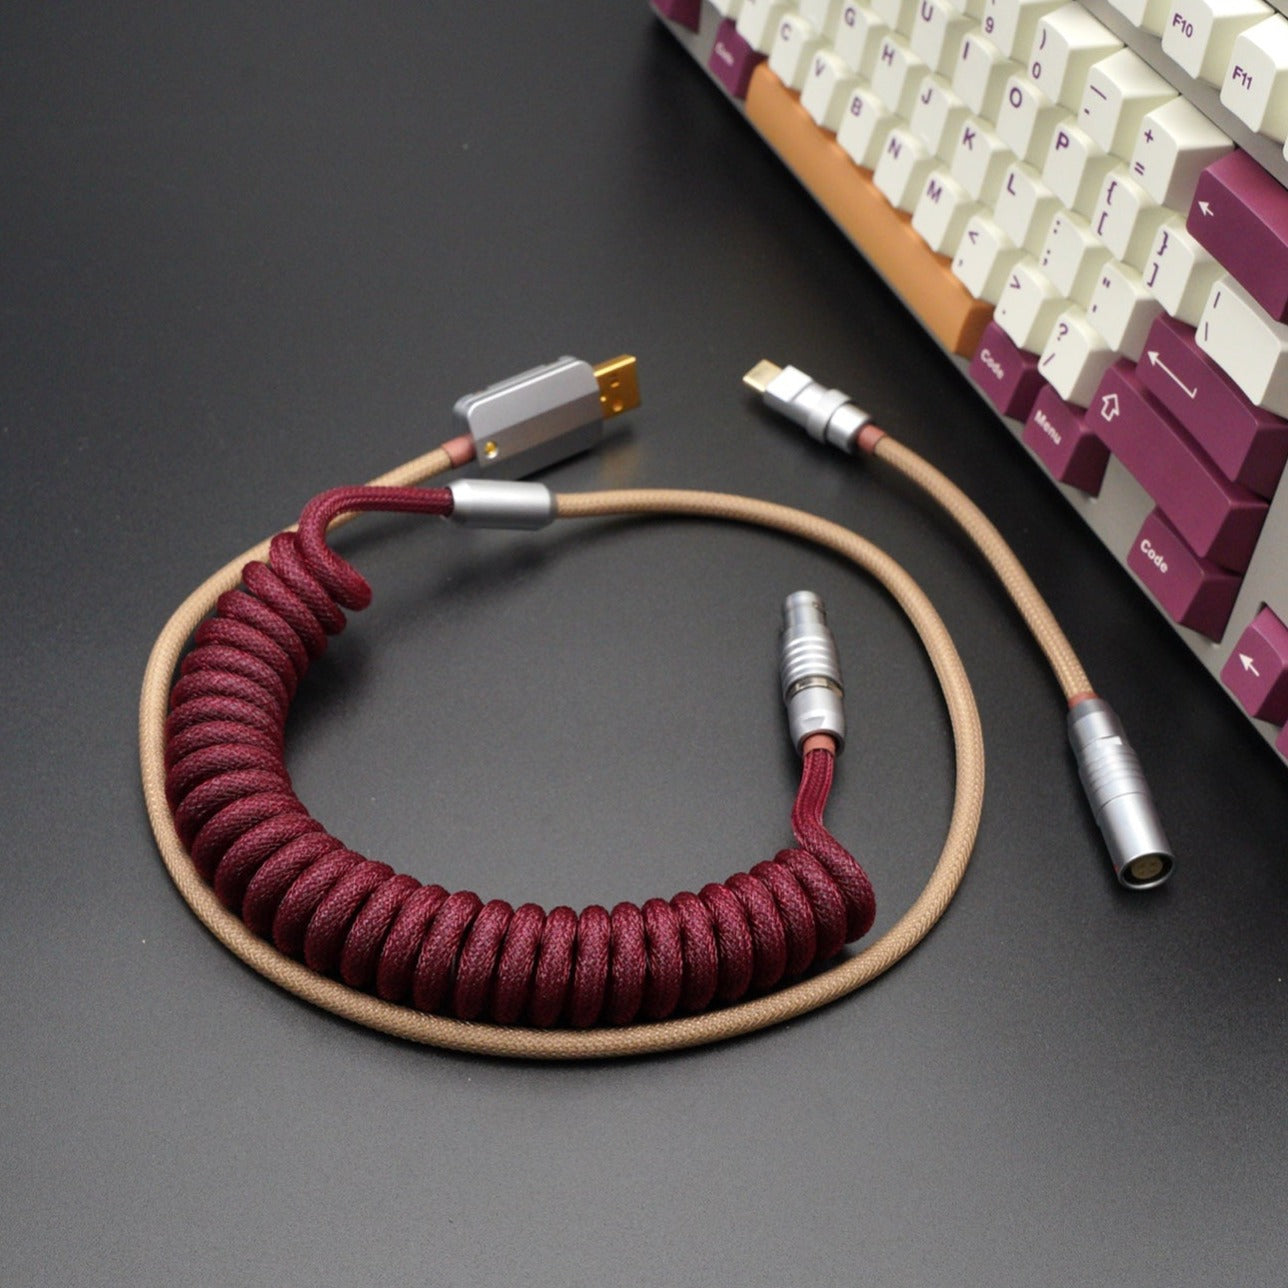 Sleeved Coiled Keyboard Aviator Cable, Lemo Style Connector - Burgundy/Light Brown